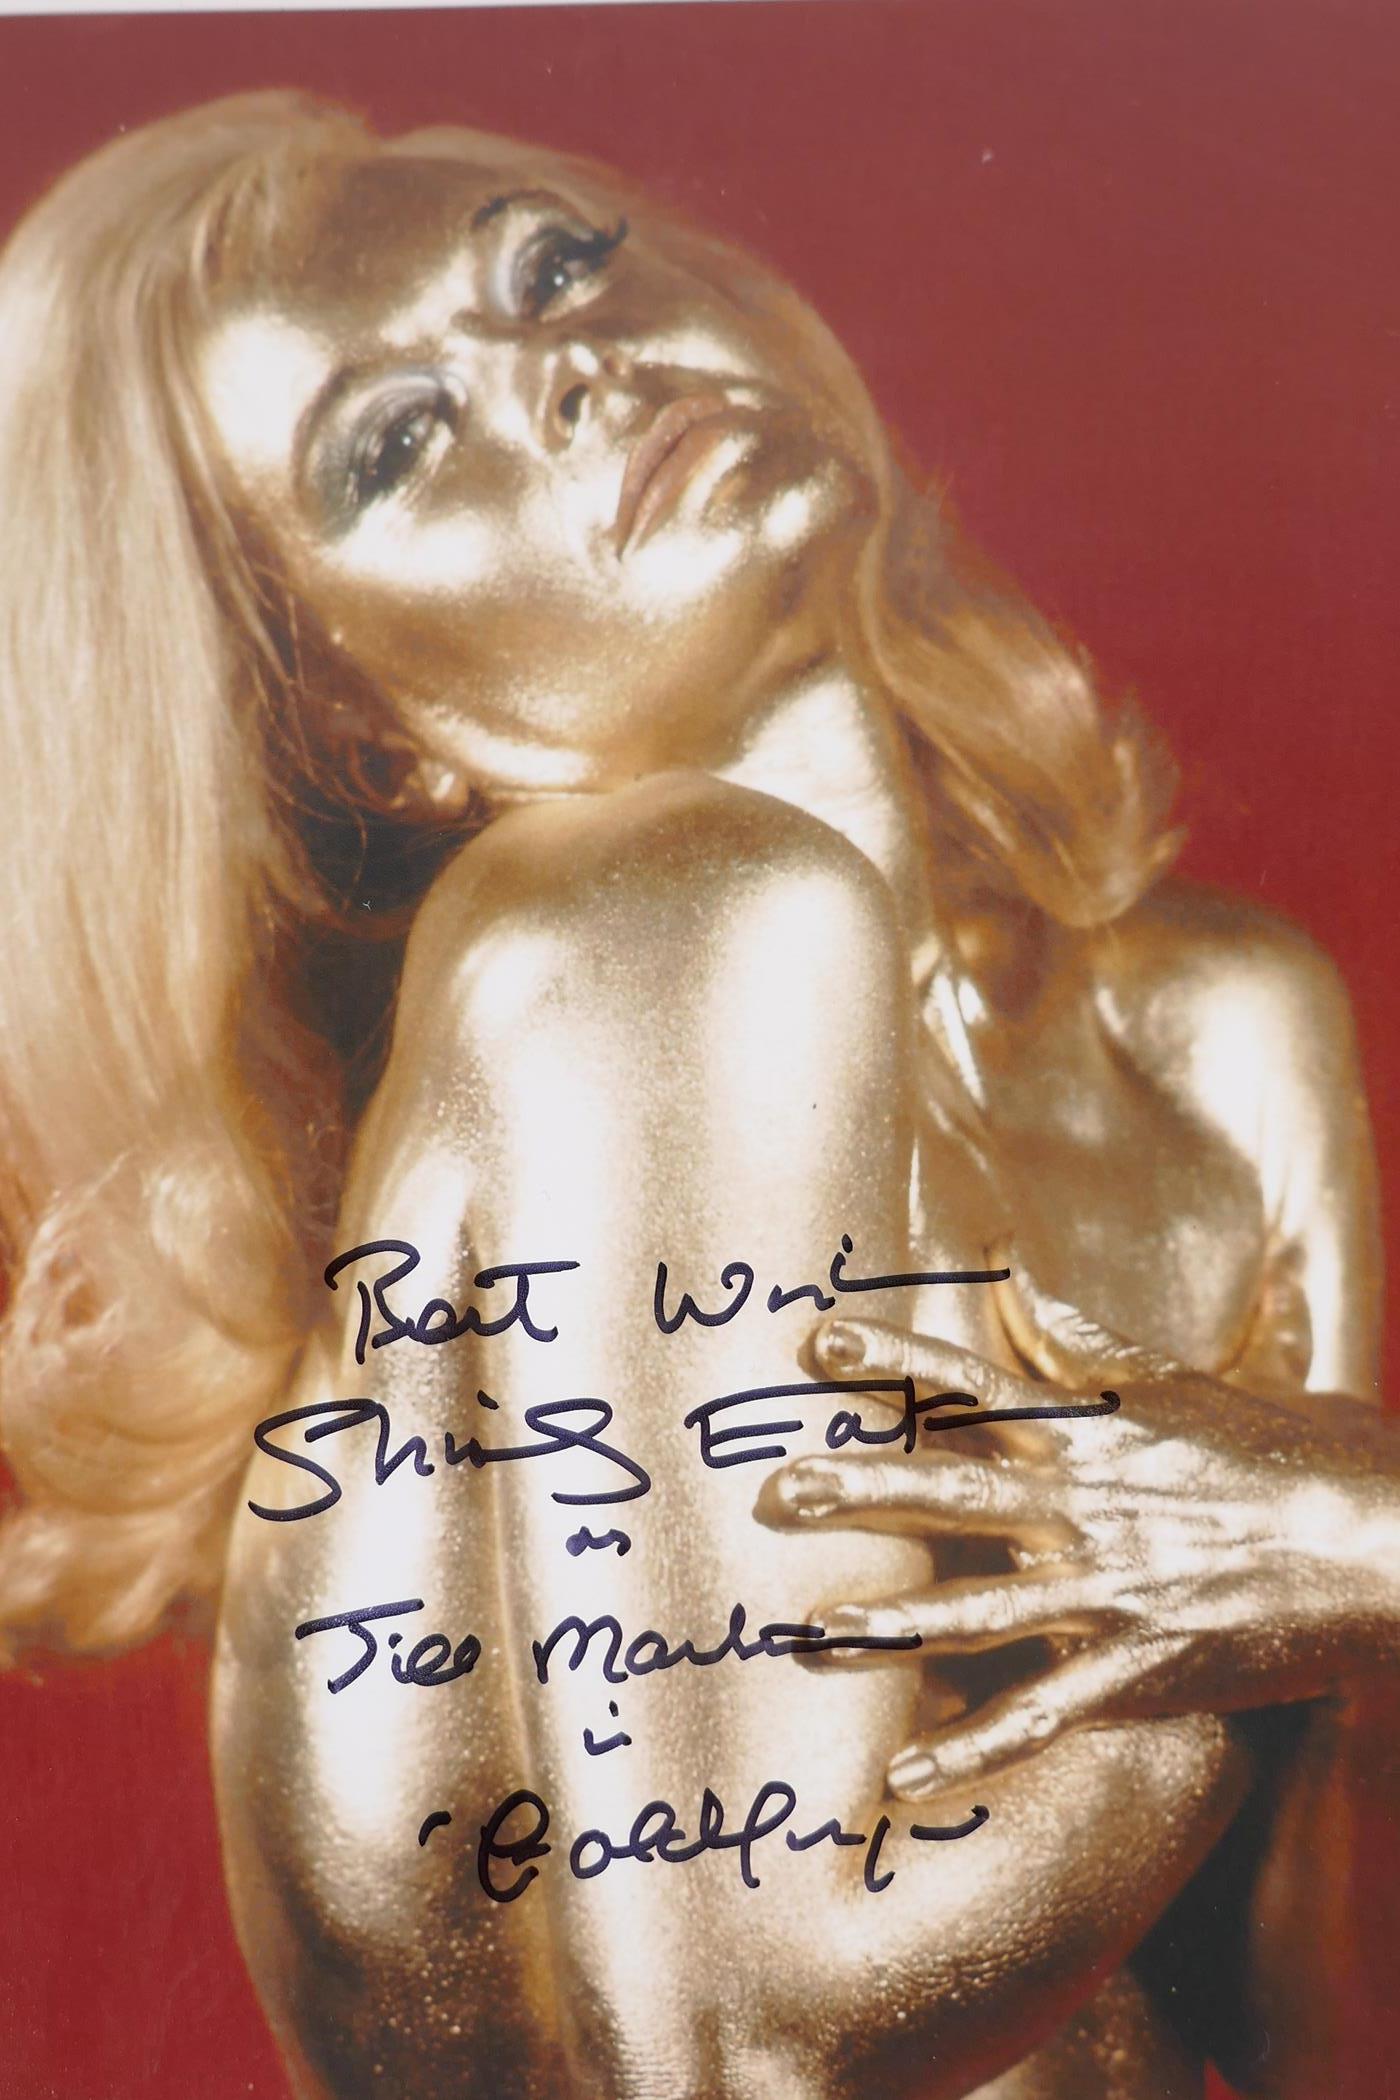 Shirley Eaton, two signed photographs of her in make up for her part as Jill Masterson in the - Image 2 of 3